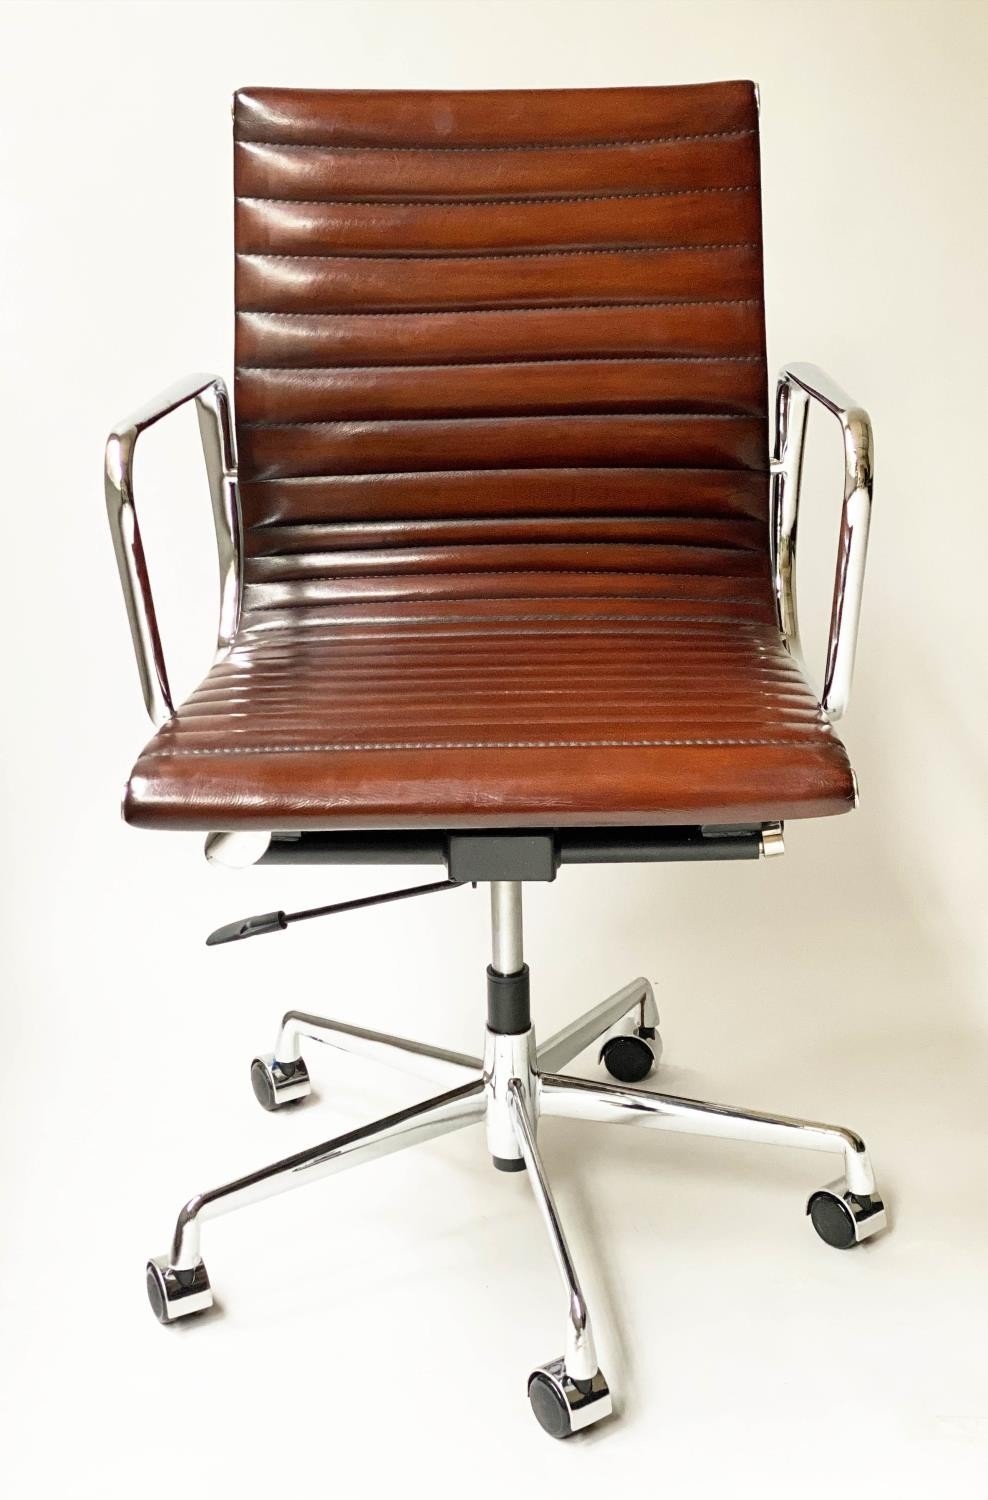 REVOLVING DESK CHAIR, Charles and Ray Eames inspired with ribbed mid brown leather seat revolving - Image 2 of 8